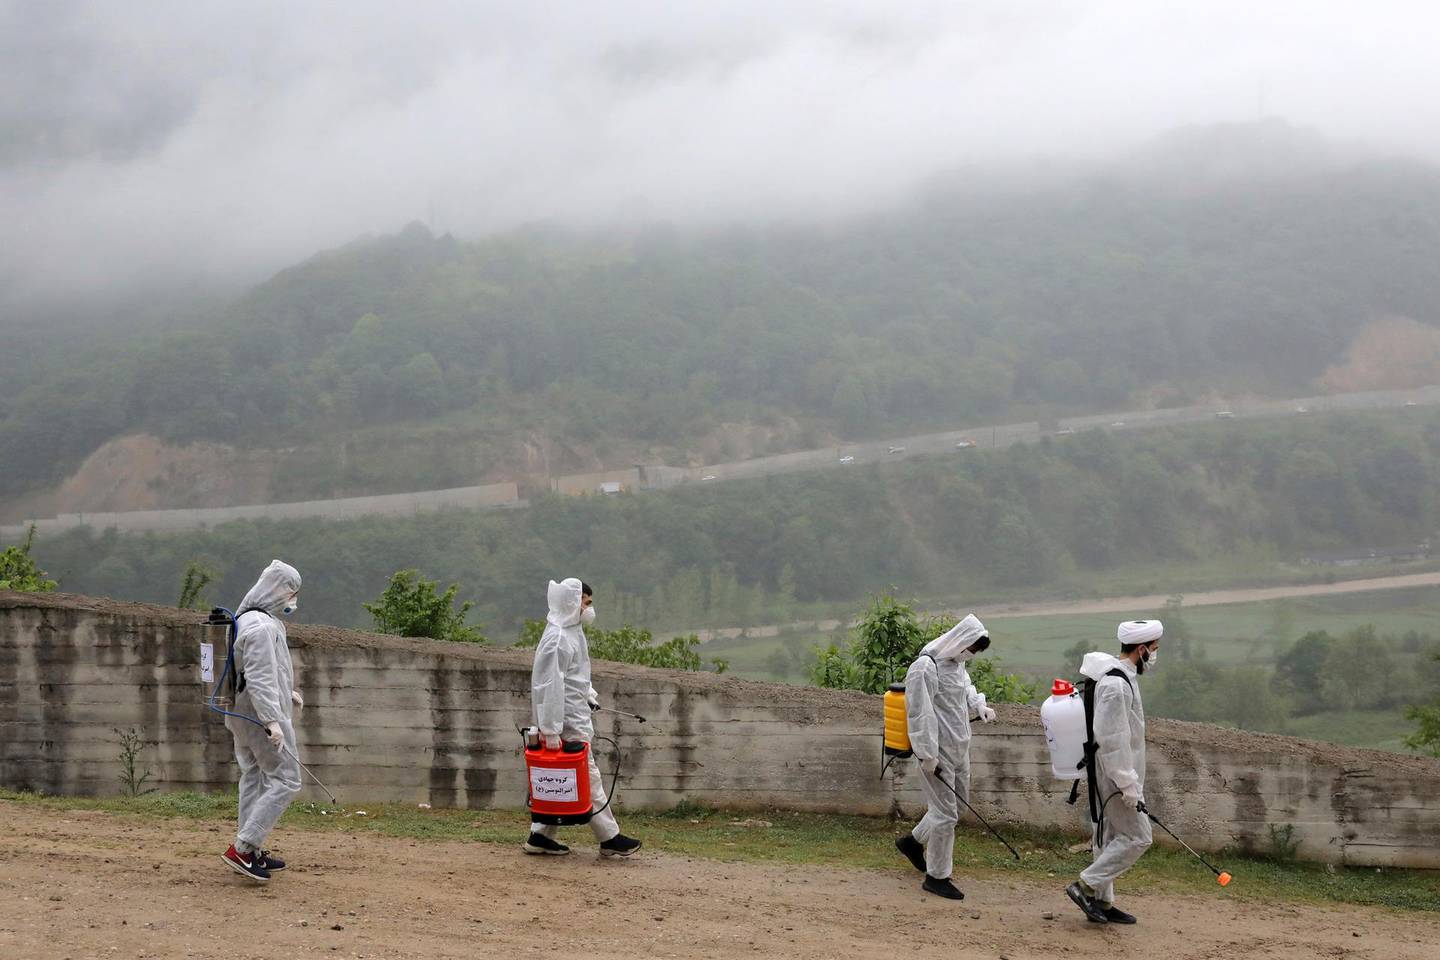 Volunteers wearing protective clothing, take part in disinfecting a village during the coronavirus outbreak, in the outskirts of the city of Ghaemshahr, in north of Iran, Wednesday, April 29, 2020. (AP Photo/Ebrahim Noroozi)